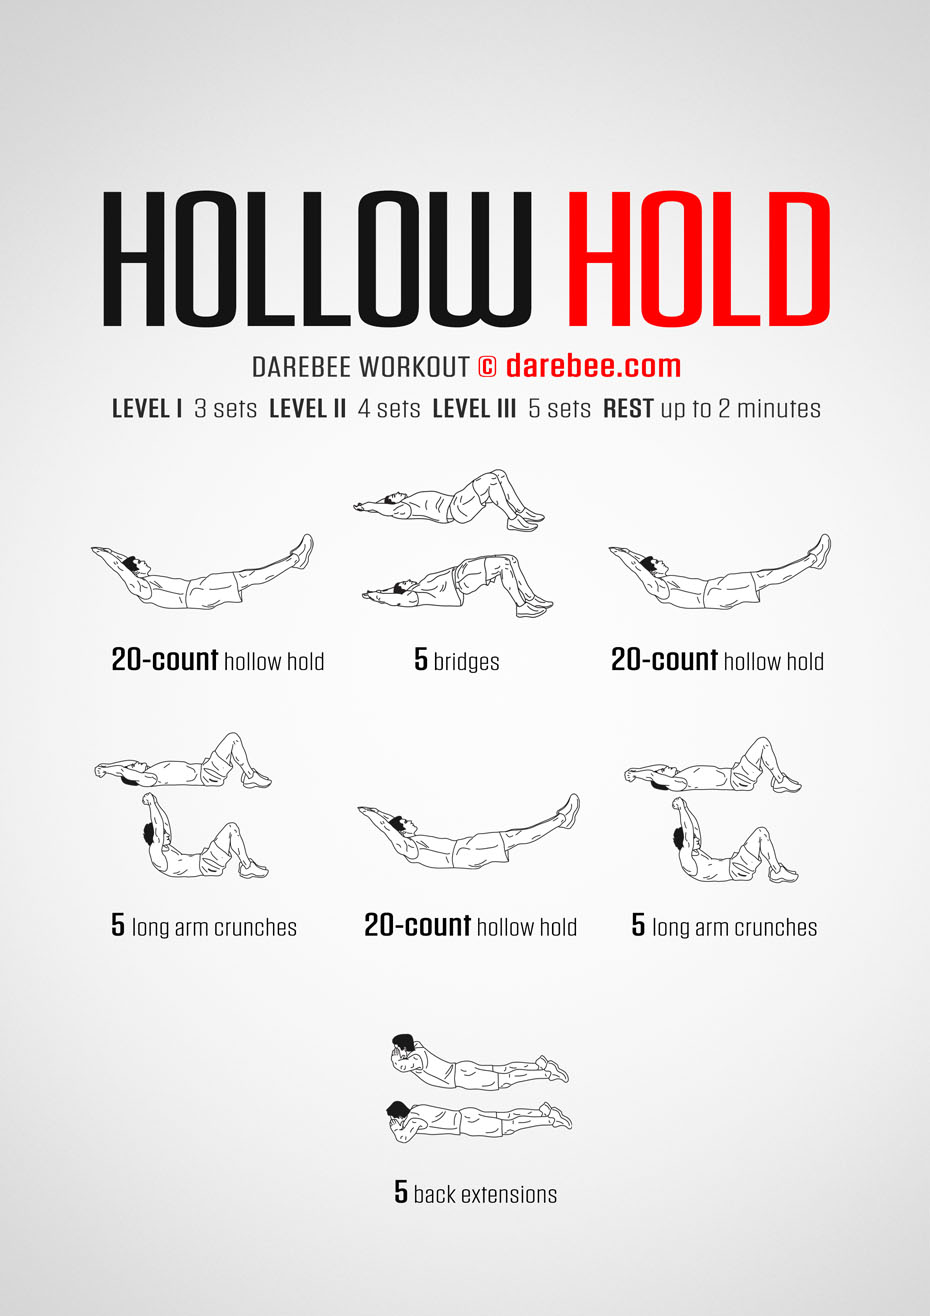 Hollow Hold is a Darebee home-fitness abs and core strength training workout you can do at home.